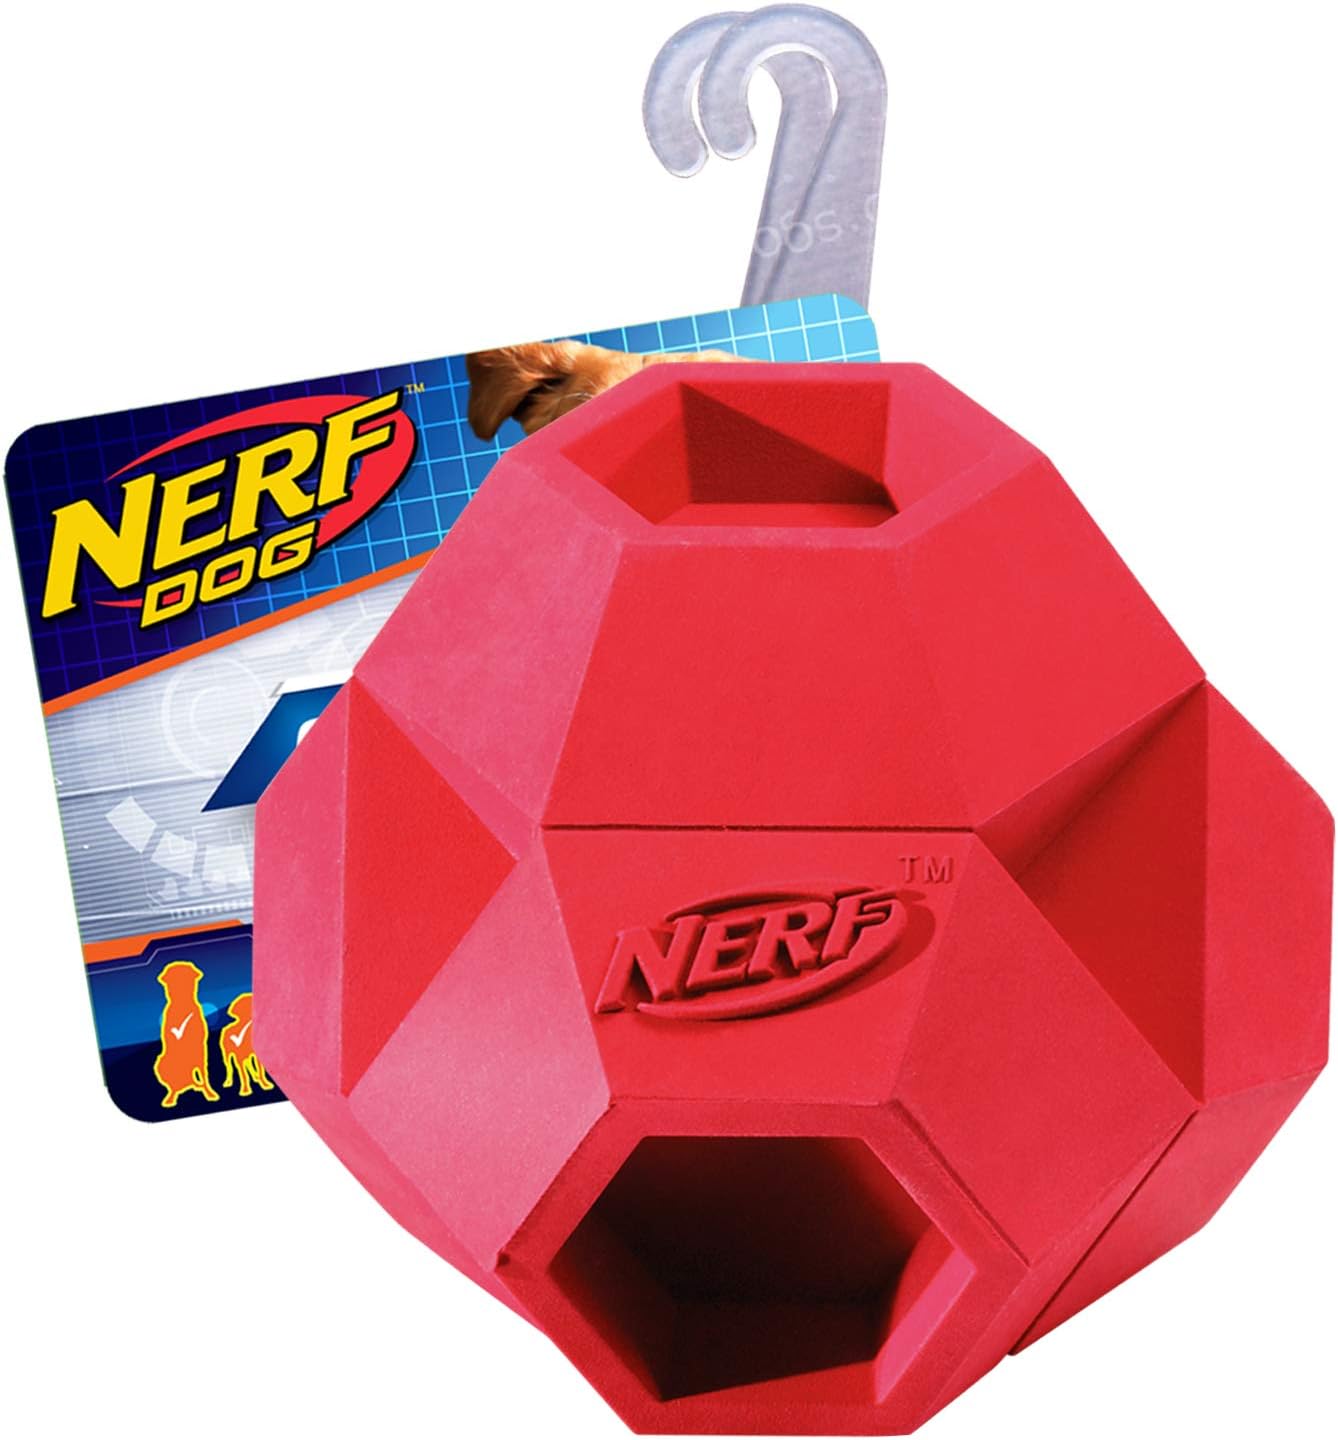 Nerf Dog 2.75in Reactor Hex Ball - Red